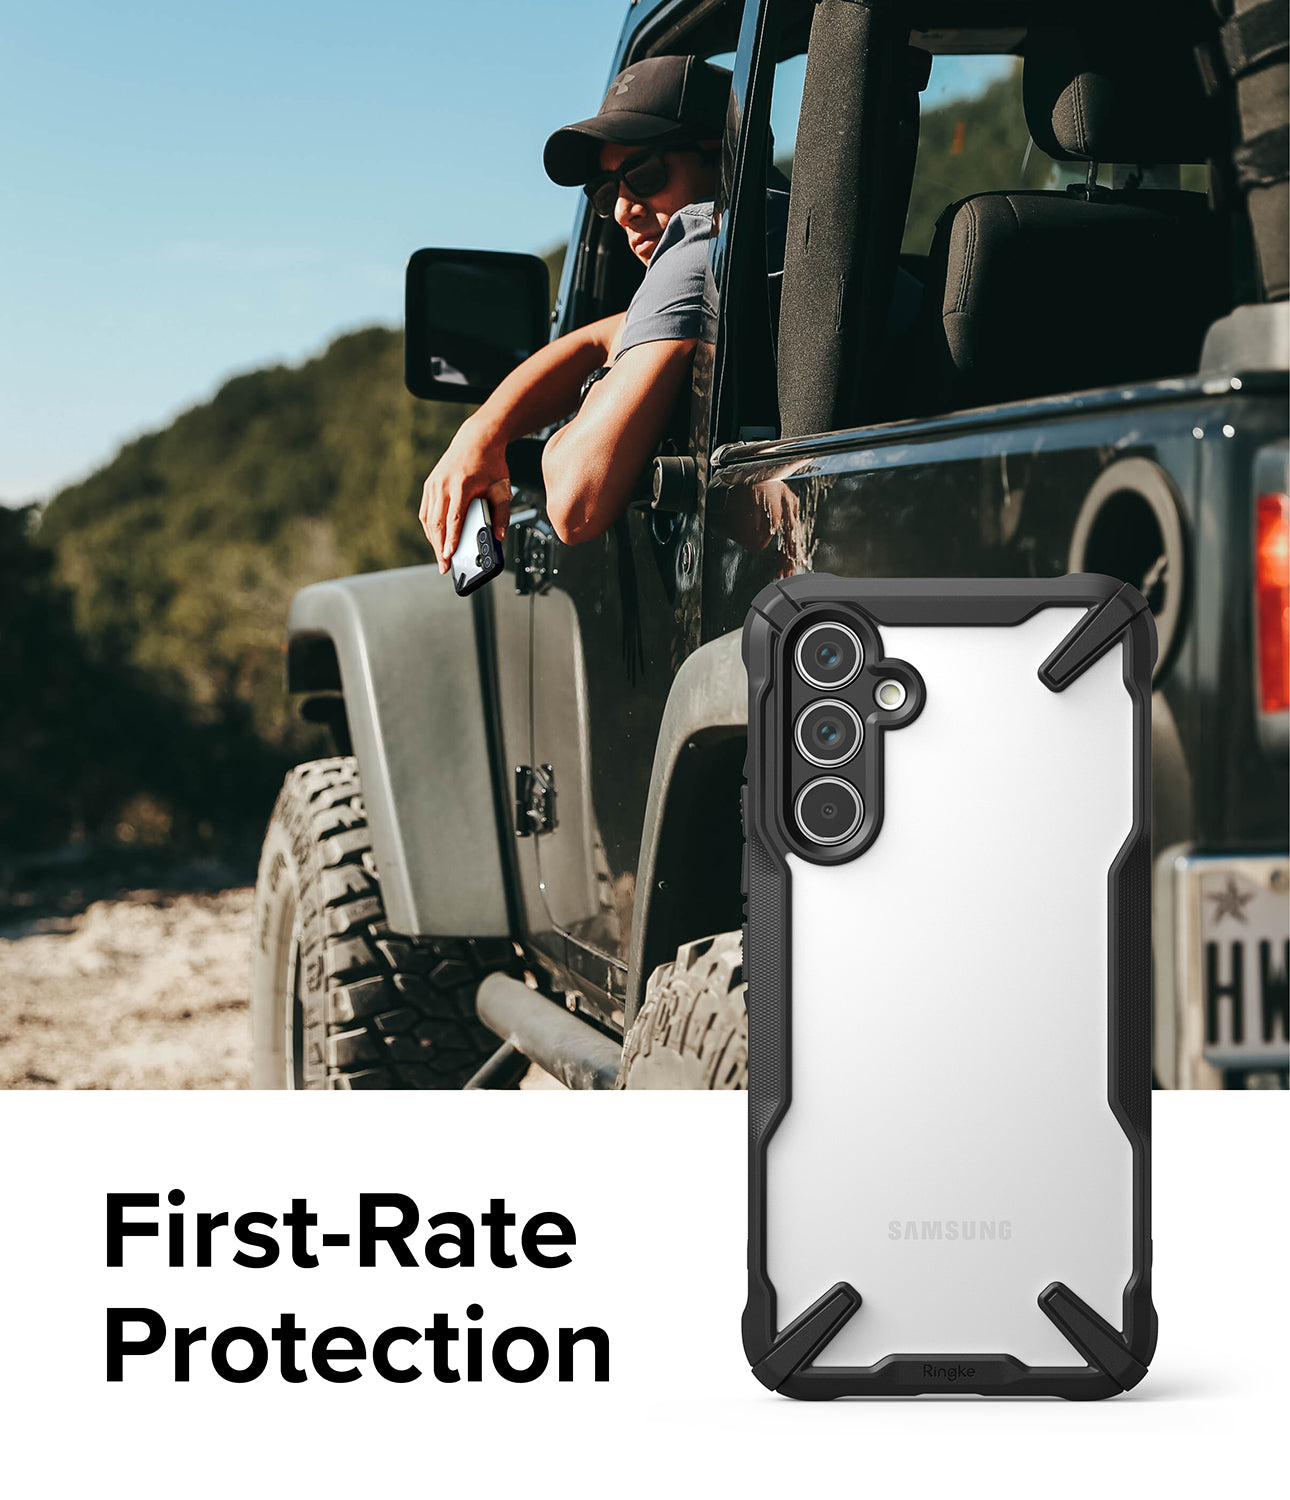 First-Rate Protection